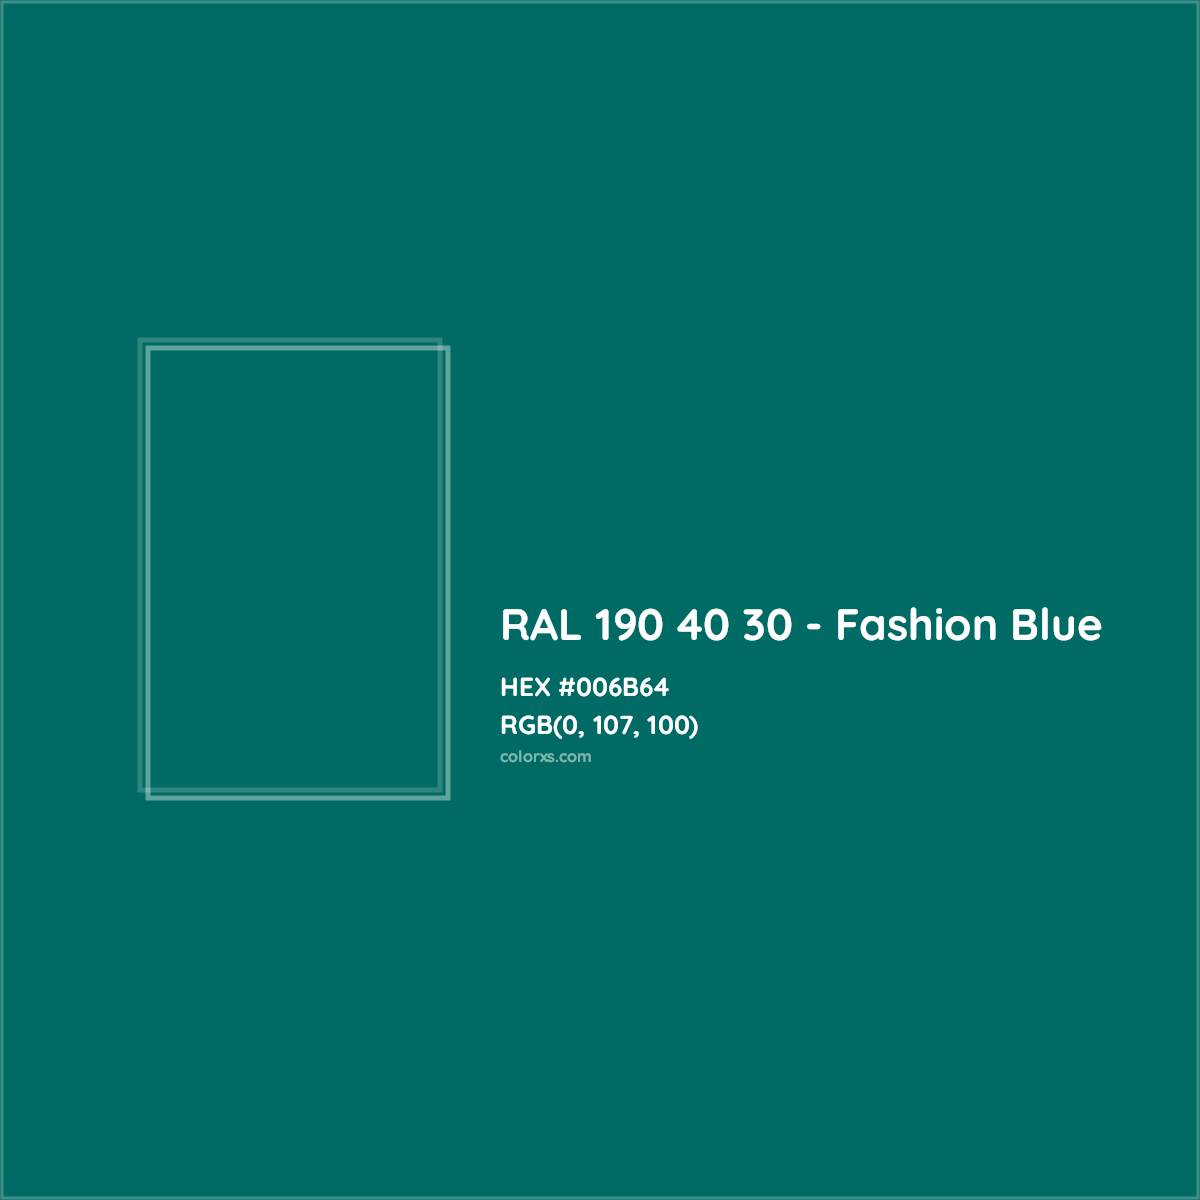 HEX #006B64 RAL 190 40 30 - Fashion Blue CMS RAL Design - Color Code